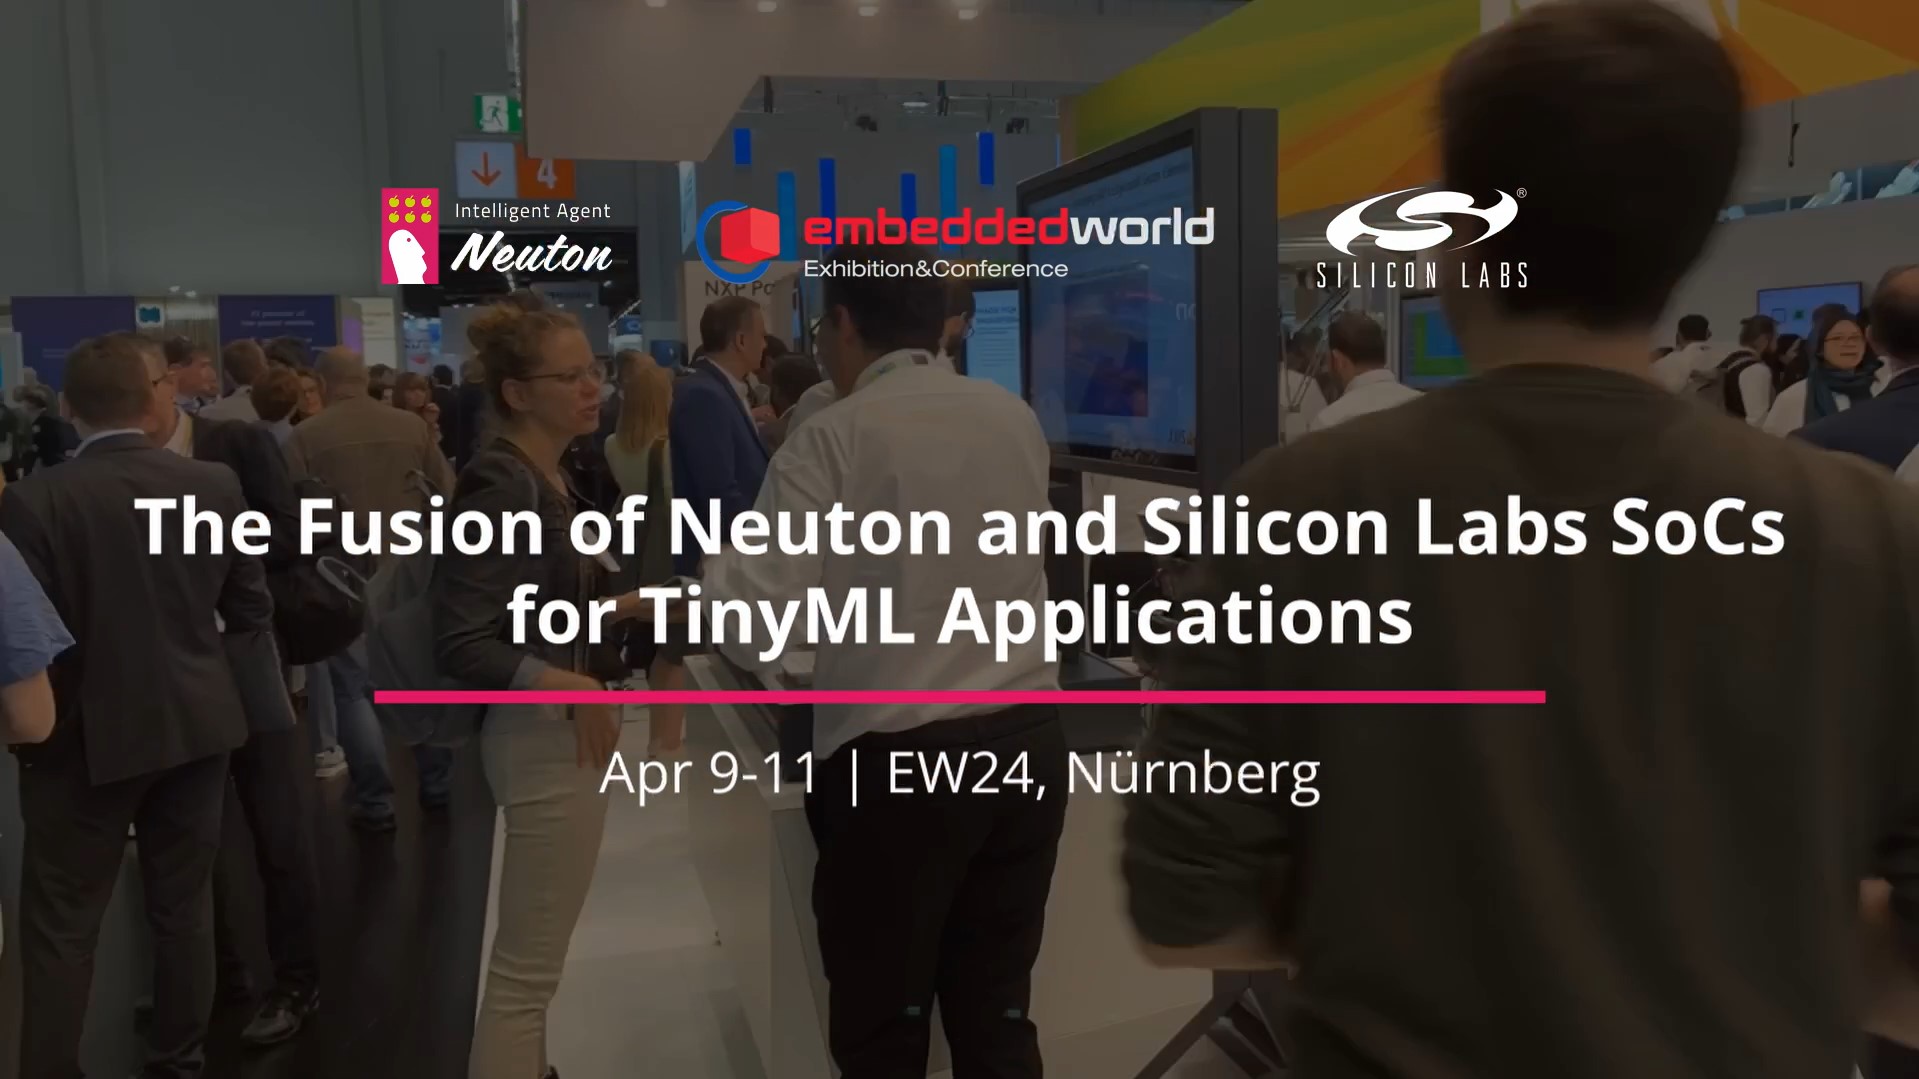 Cutting-edge on-device package tracking solution at EW24 with Silicon Labs